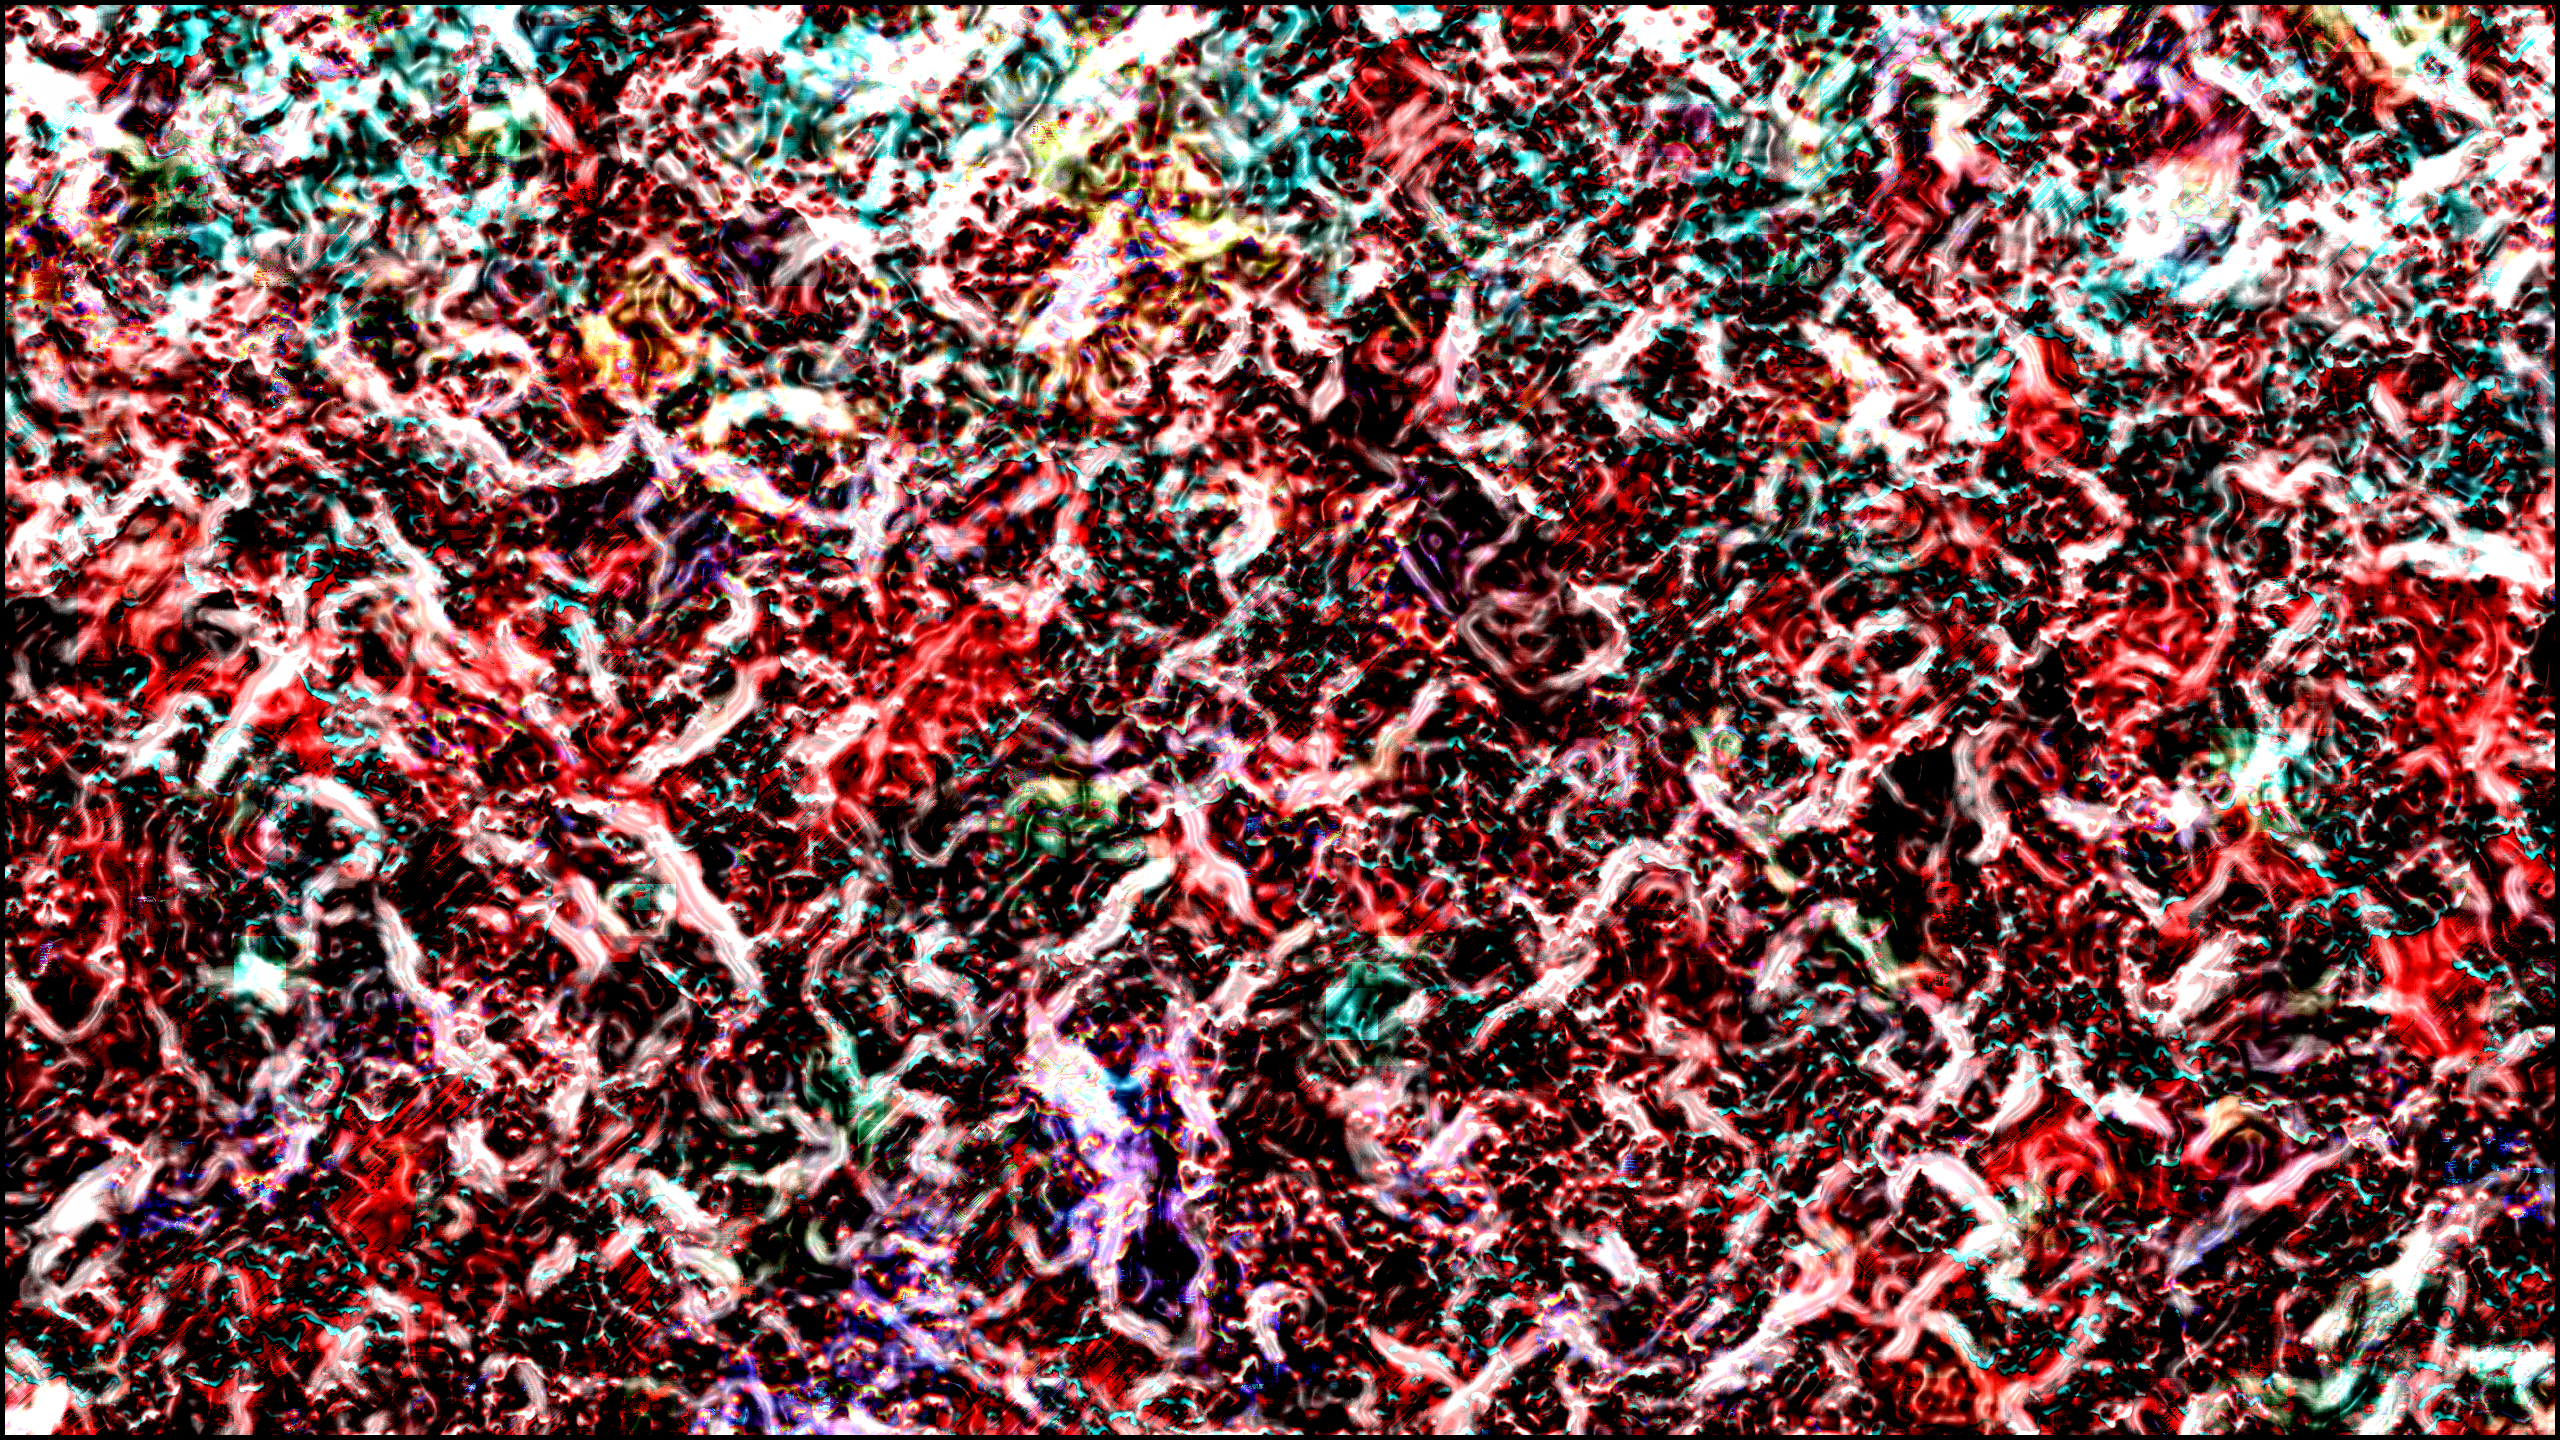 General 2560x1440 abstract digital art colorful